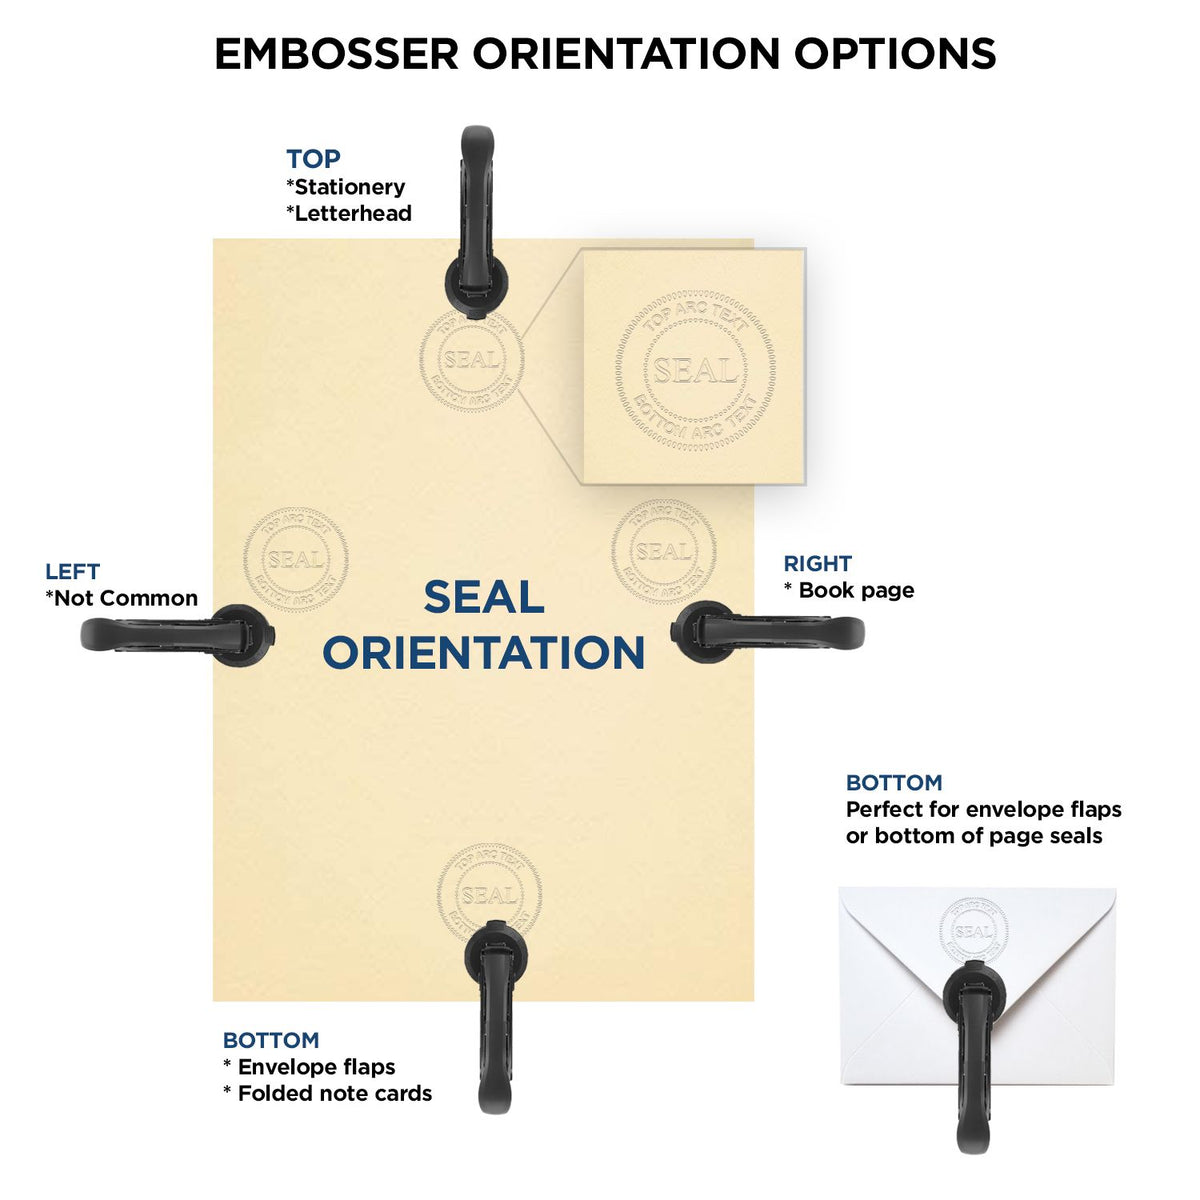 An infographic for the Hybrid Tennessee Land Surveyor Seal showing embosser orientation, this is showing examples of a top, bottom, right and left insert.